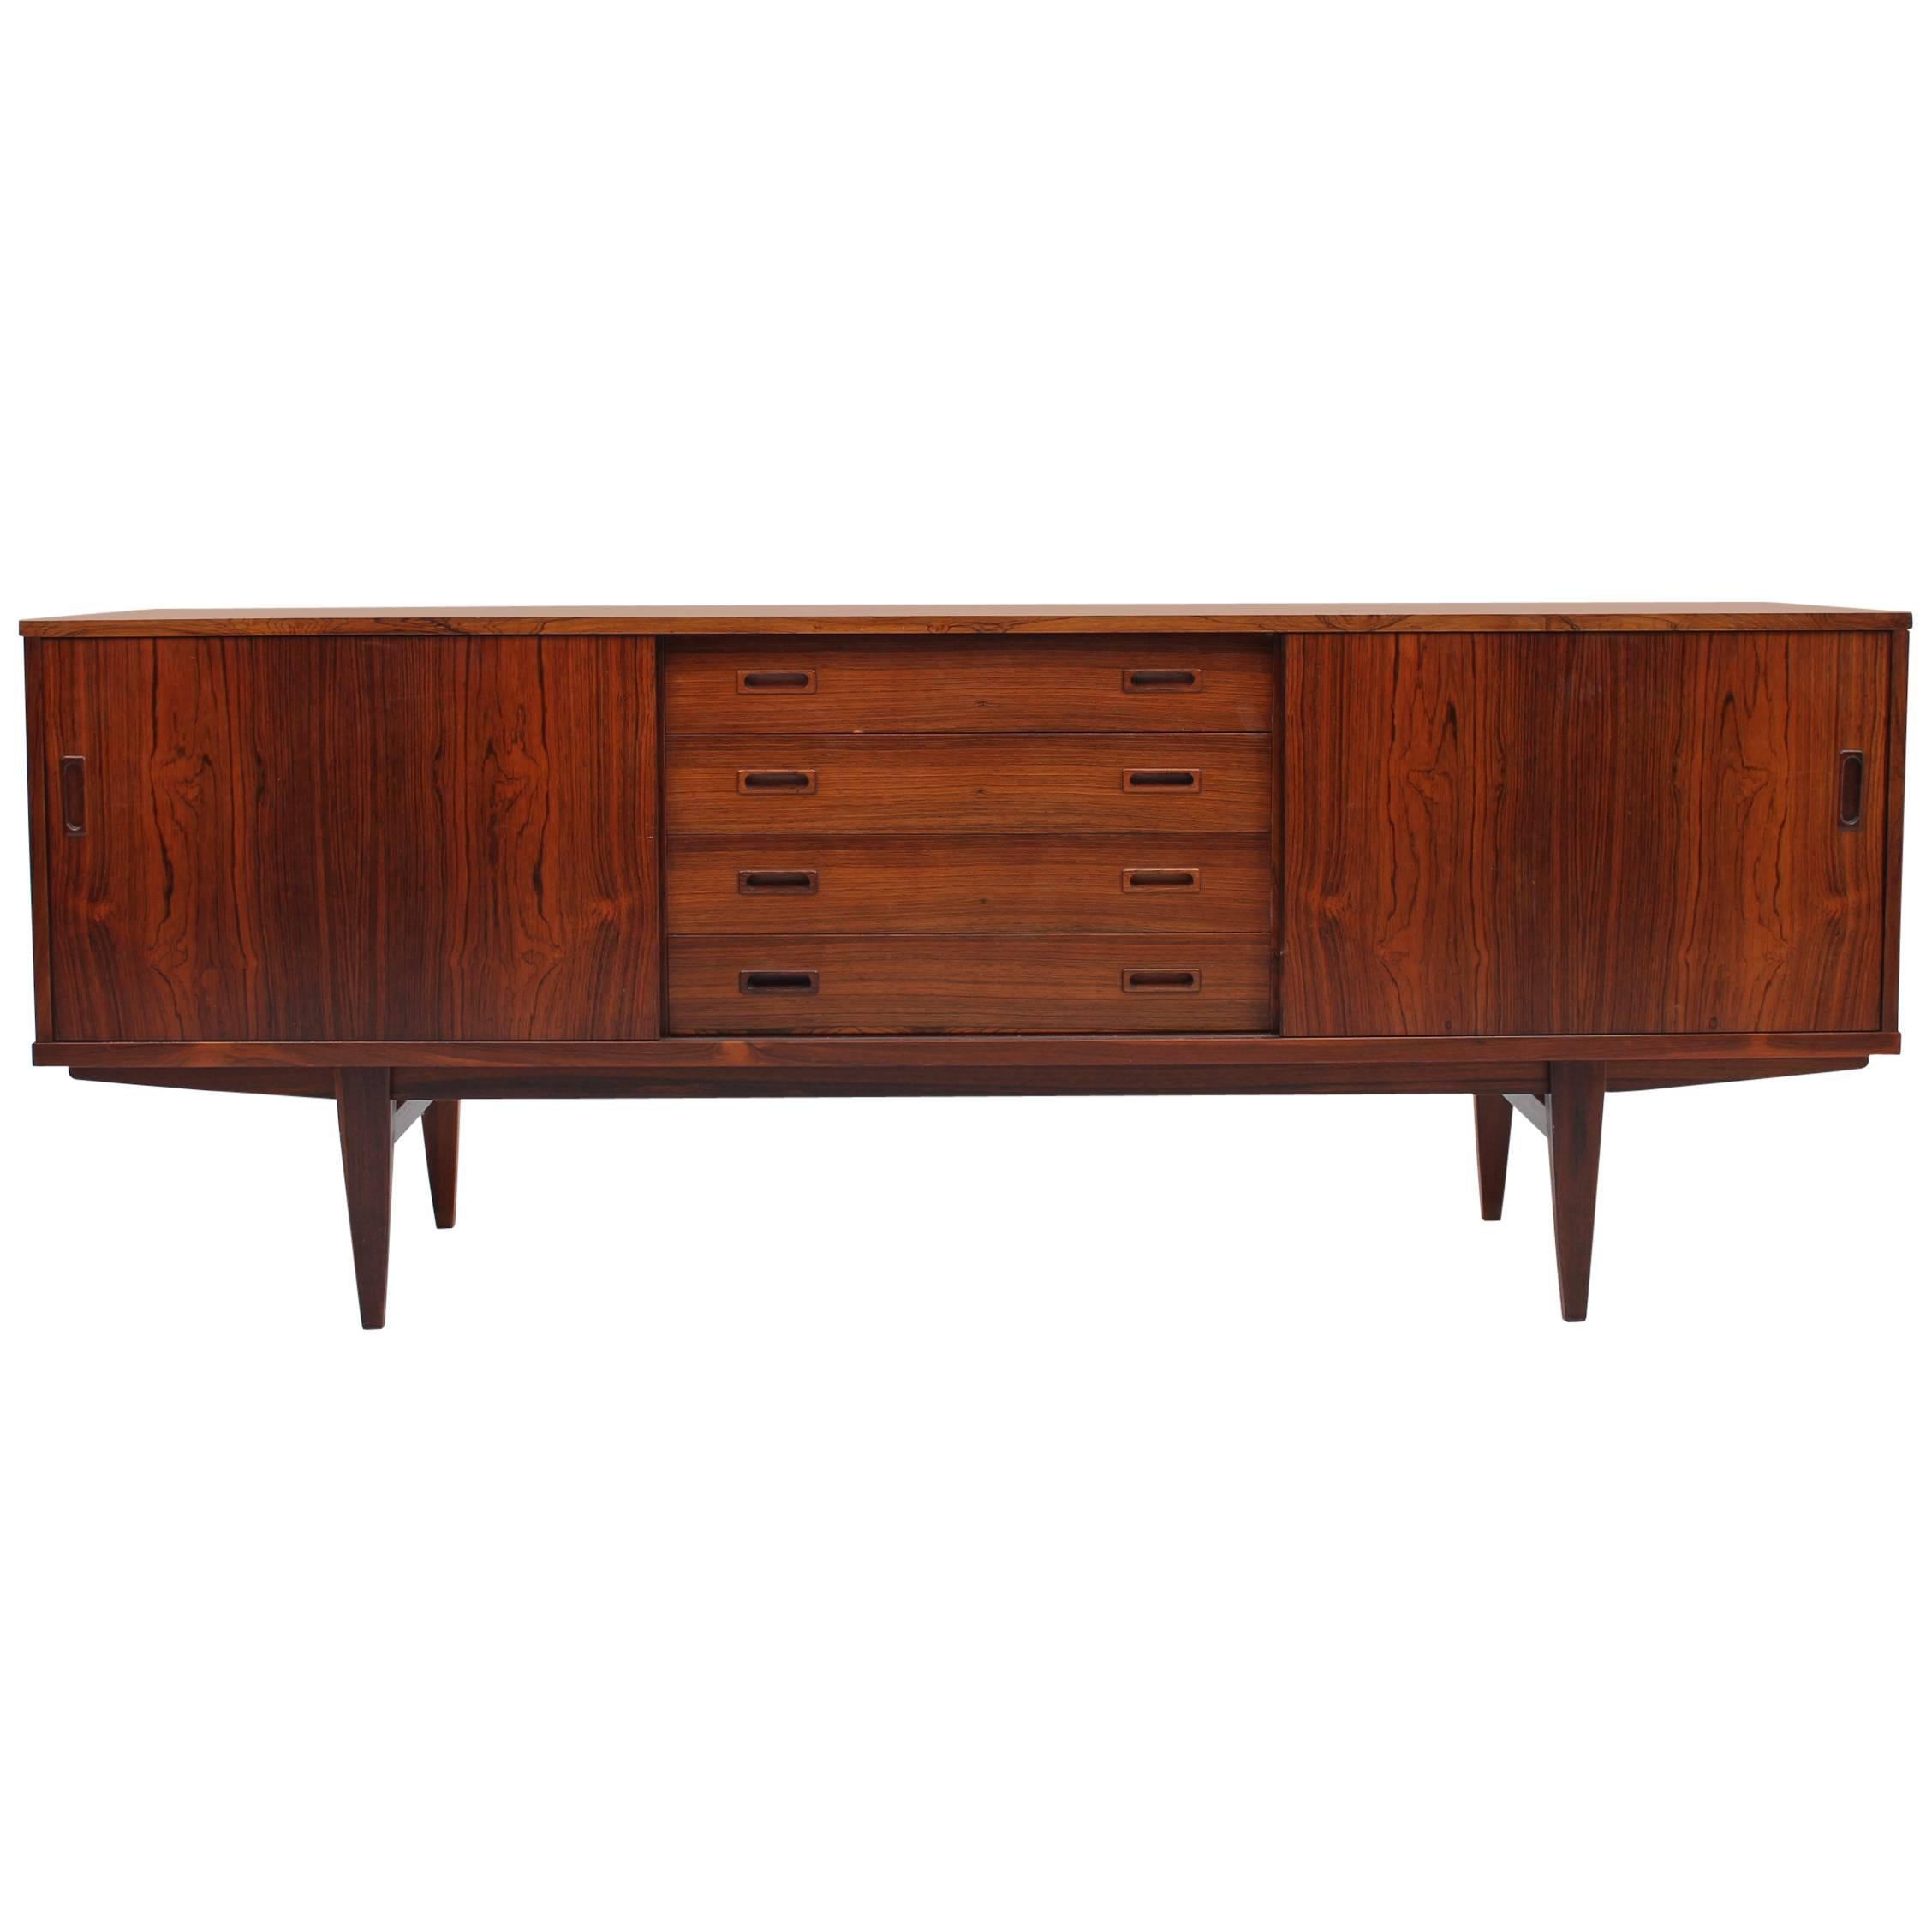 Rosewood Credenza by Lyby Mobler, Danish, Mid-Century Modern For Sale